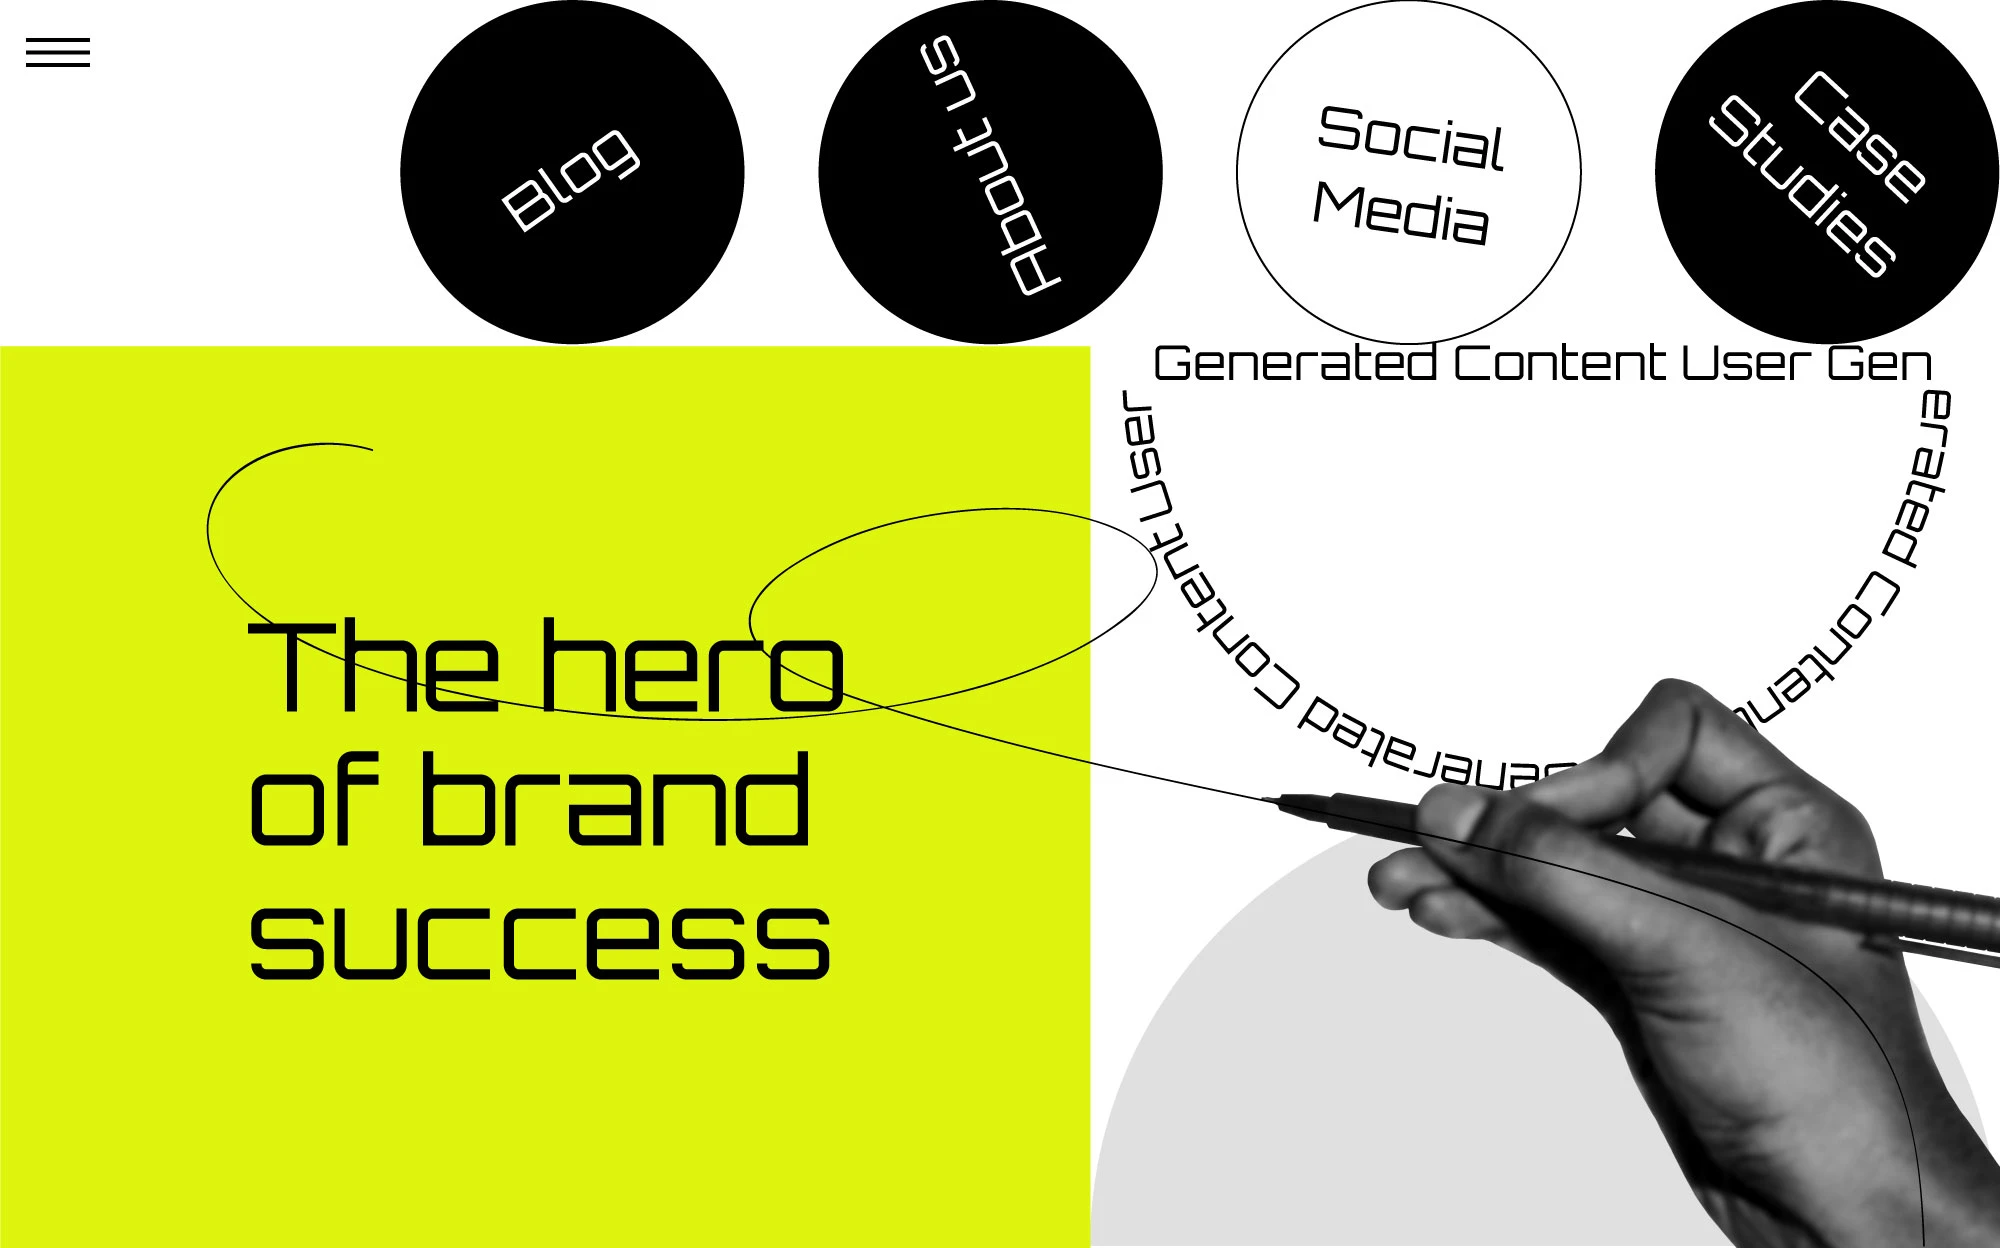 Business Storytelling: The Hero of Brand Success